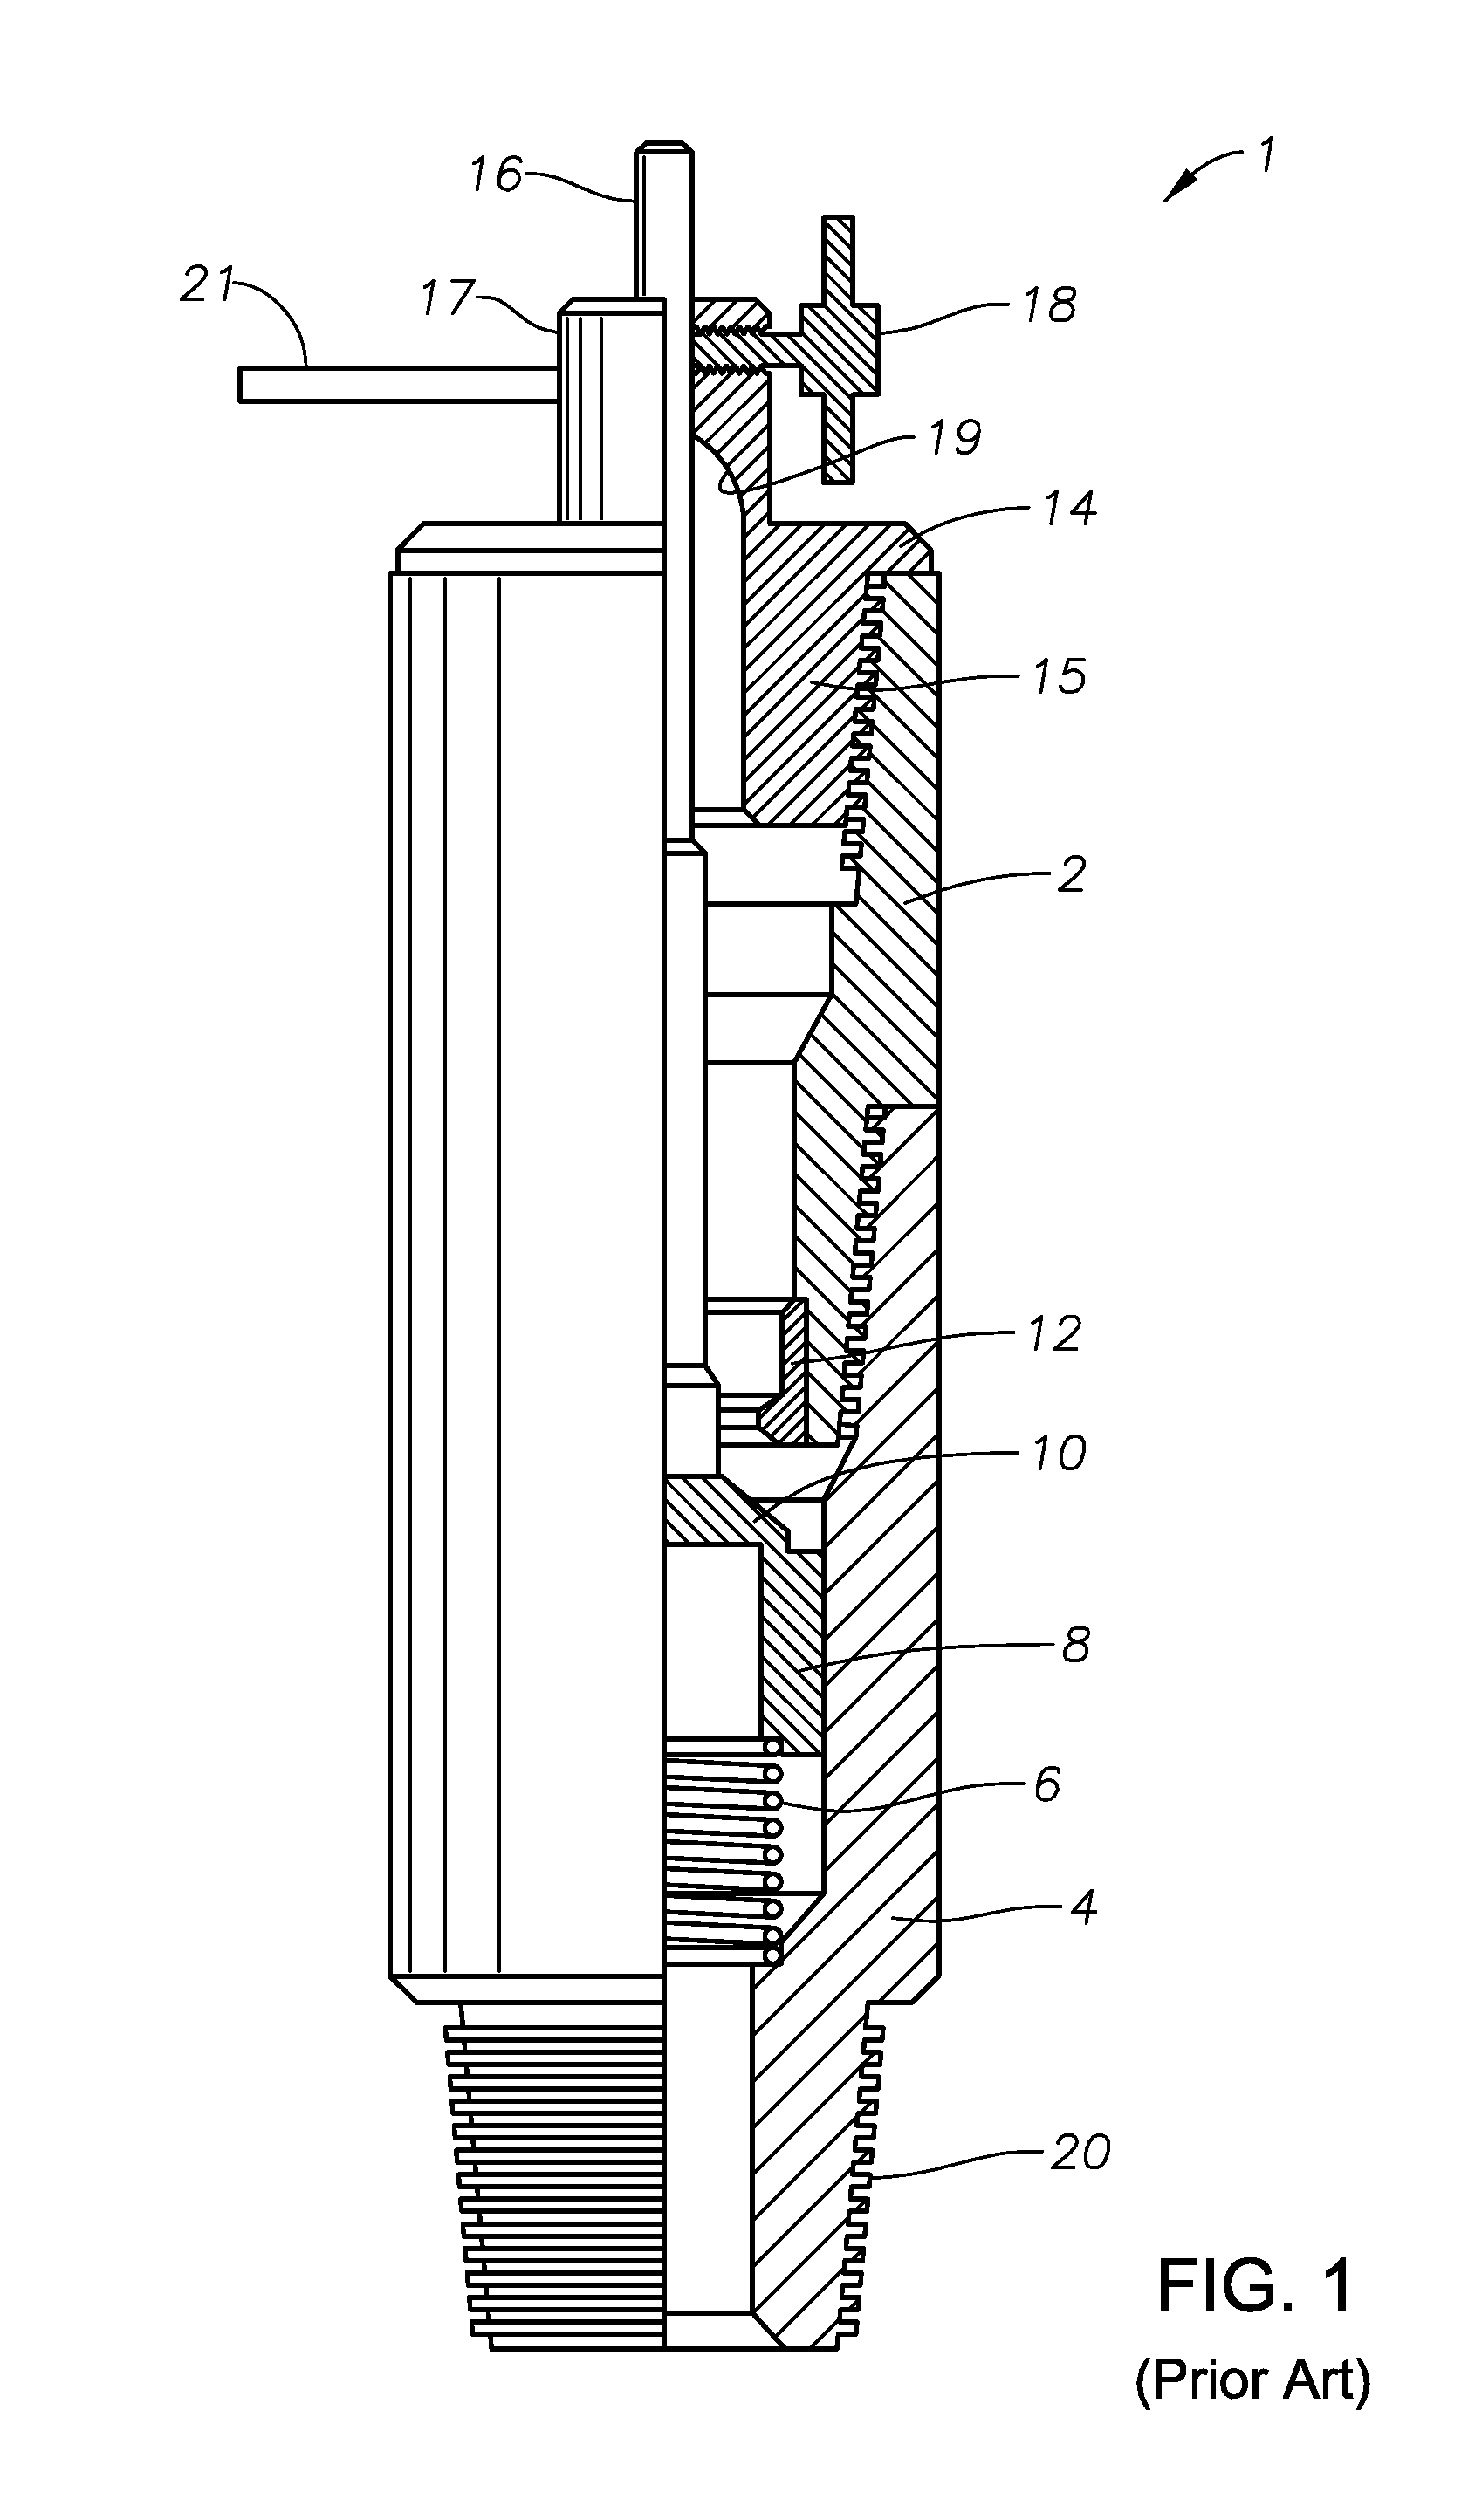 Release tool for a drill string inside blowout preventer